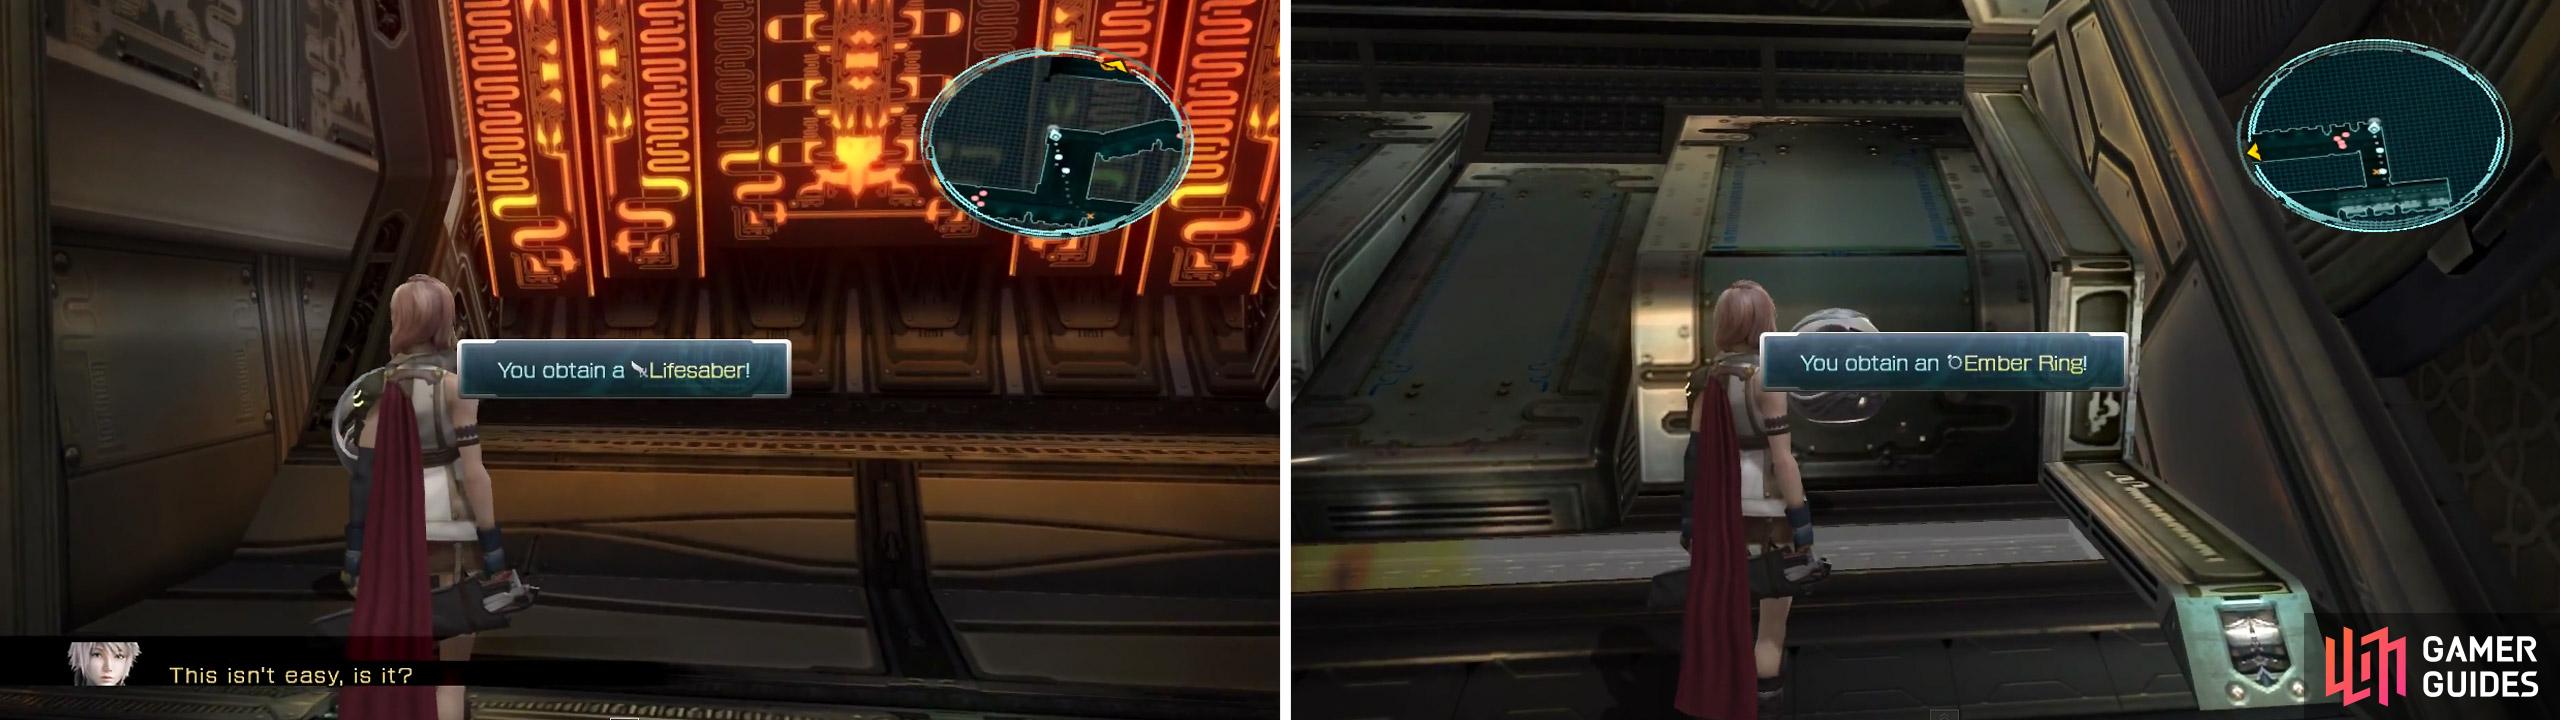 Lifesaber (left) and Ember Ring (right) locations.